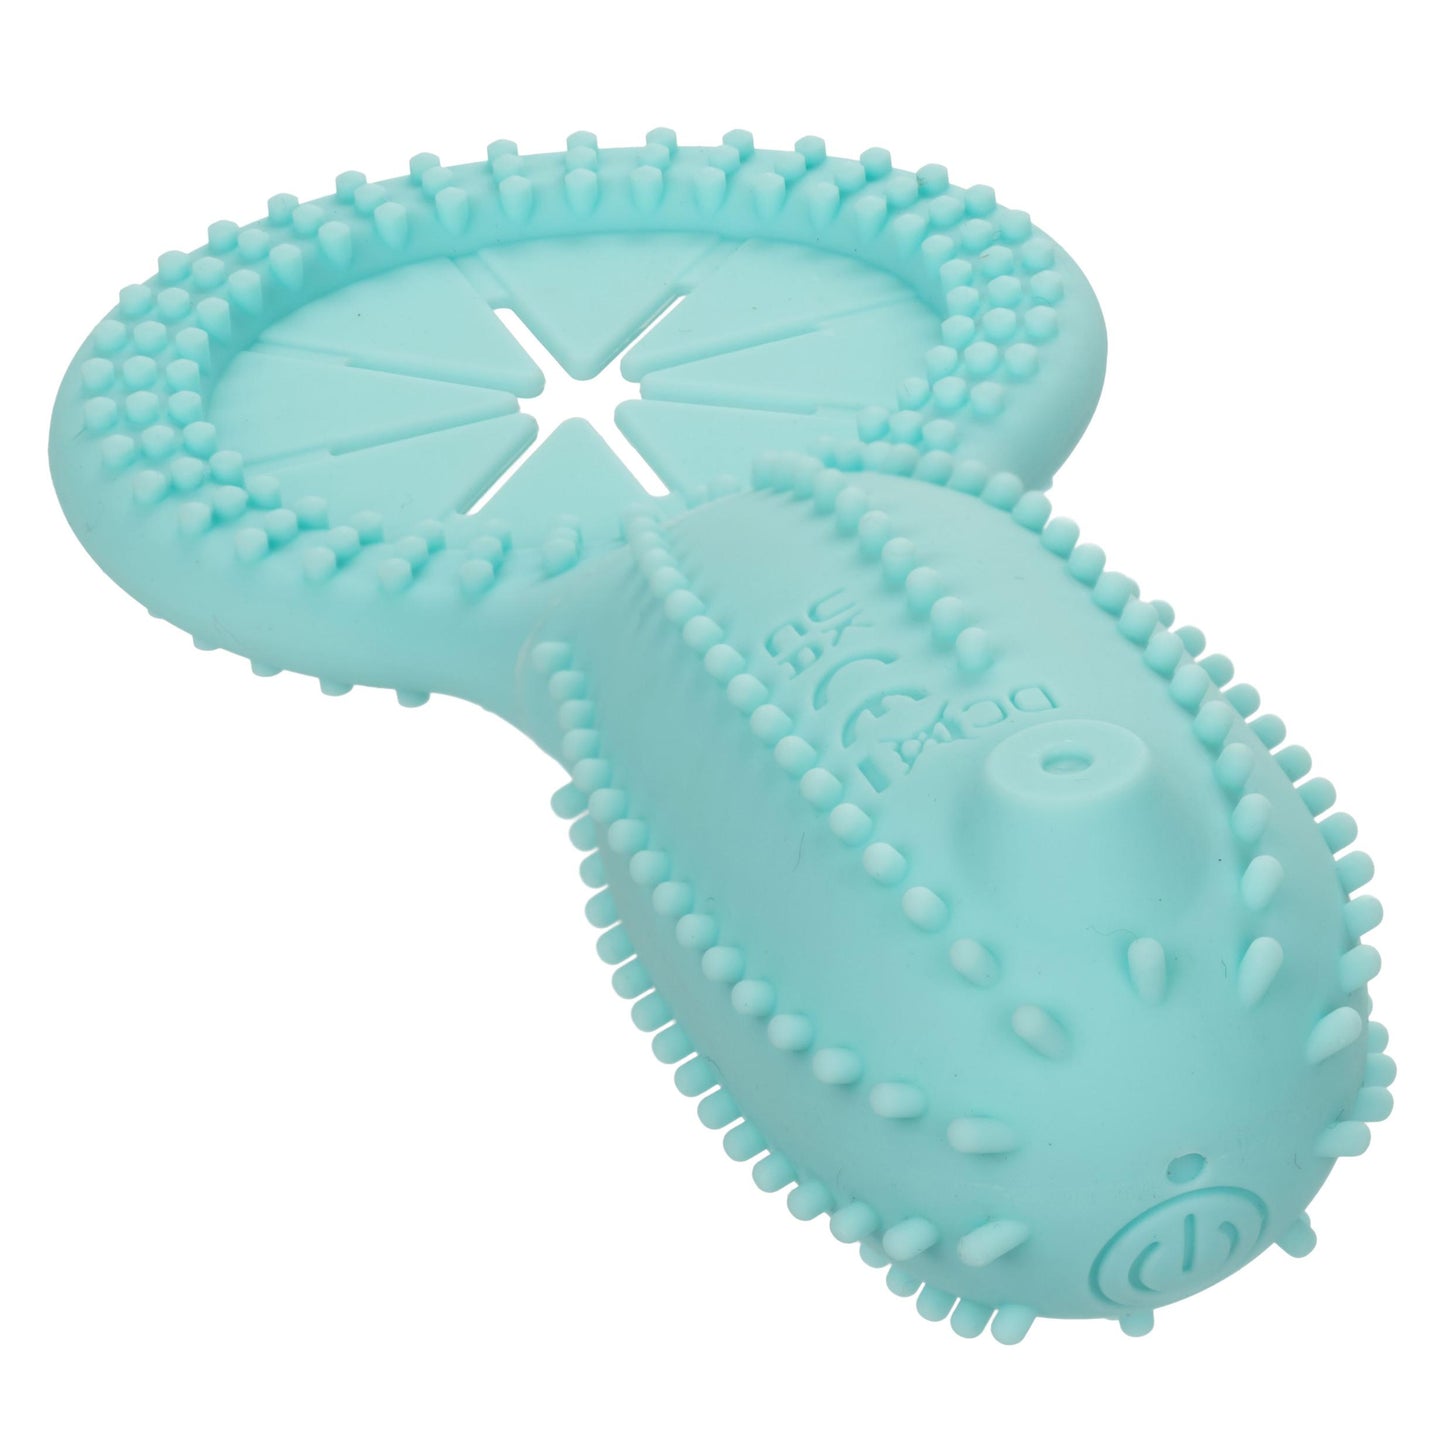 Silicone Rechargeable Elite 12x Enhancer - Teal